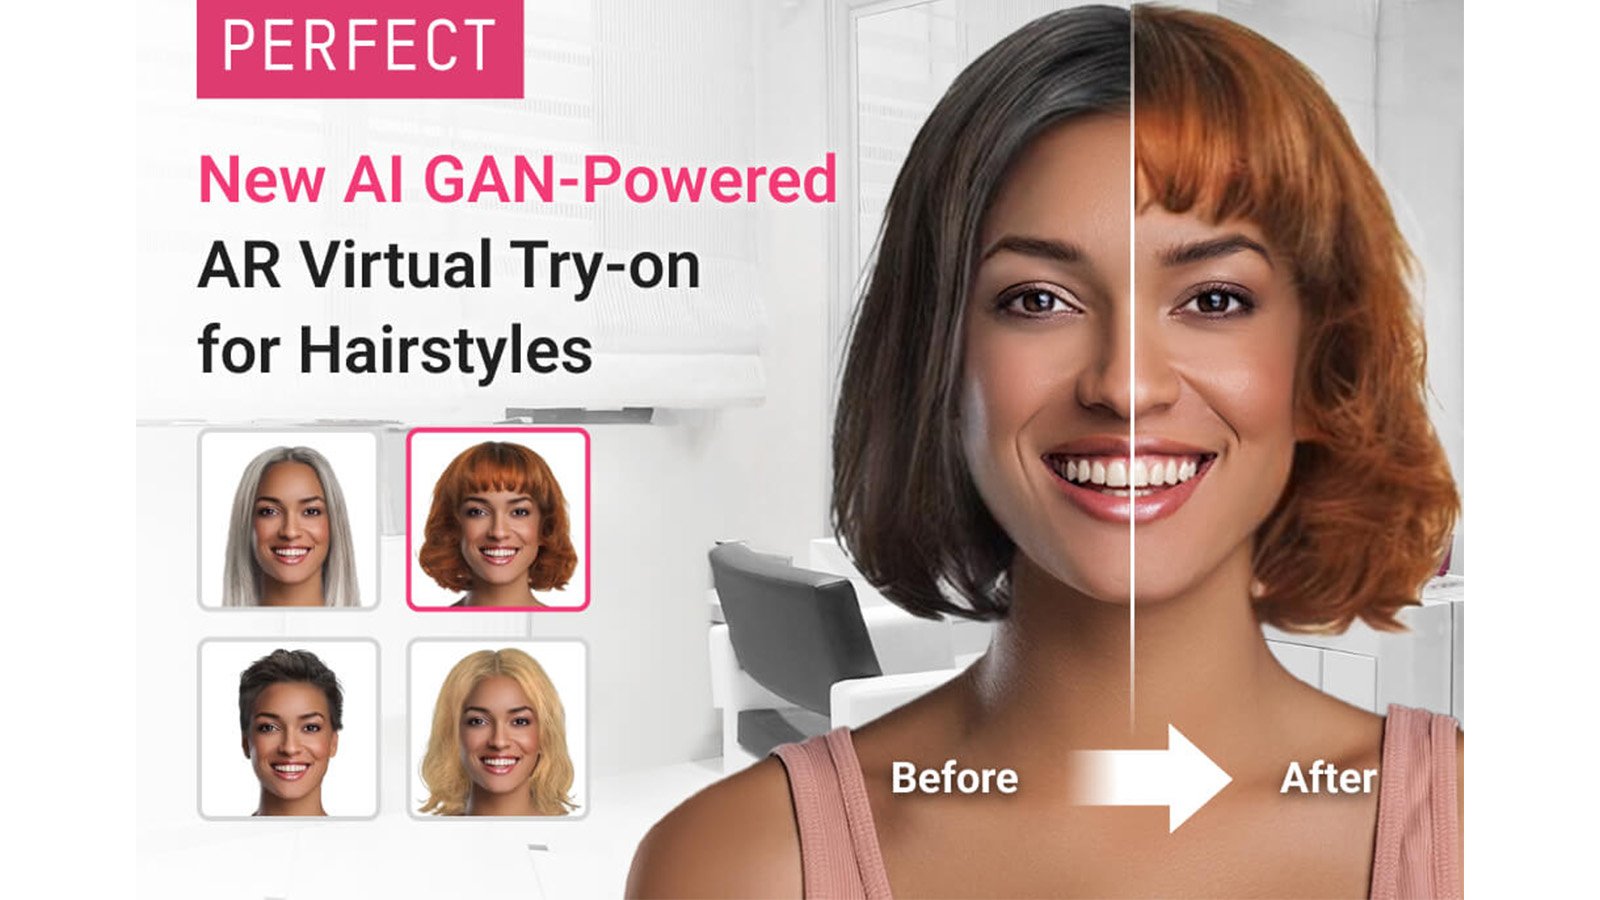 AI GAN-Powered Virtual Try-on for Hairstyles